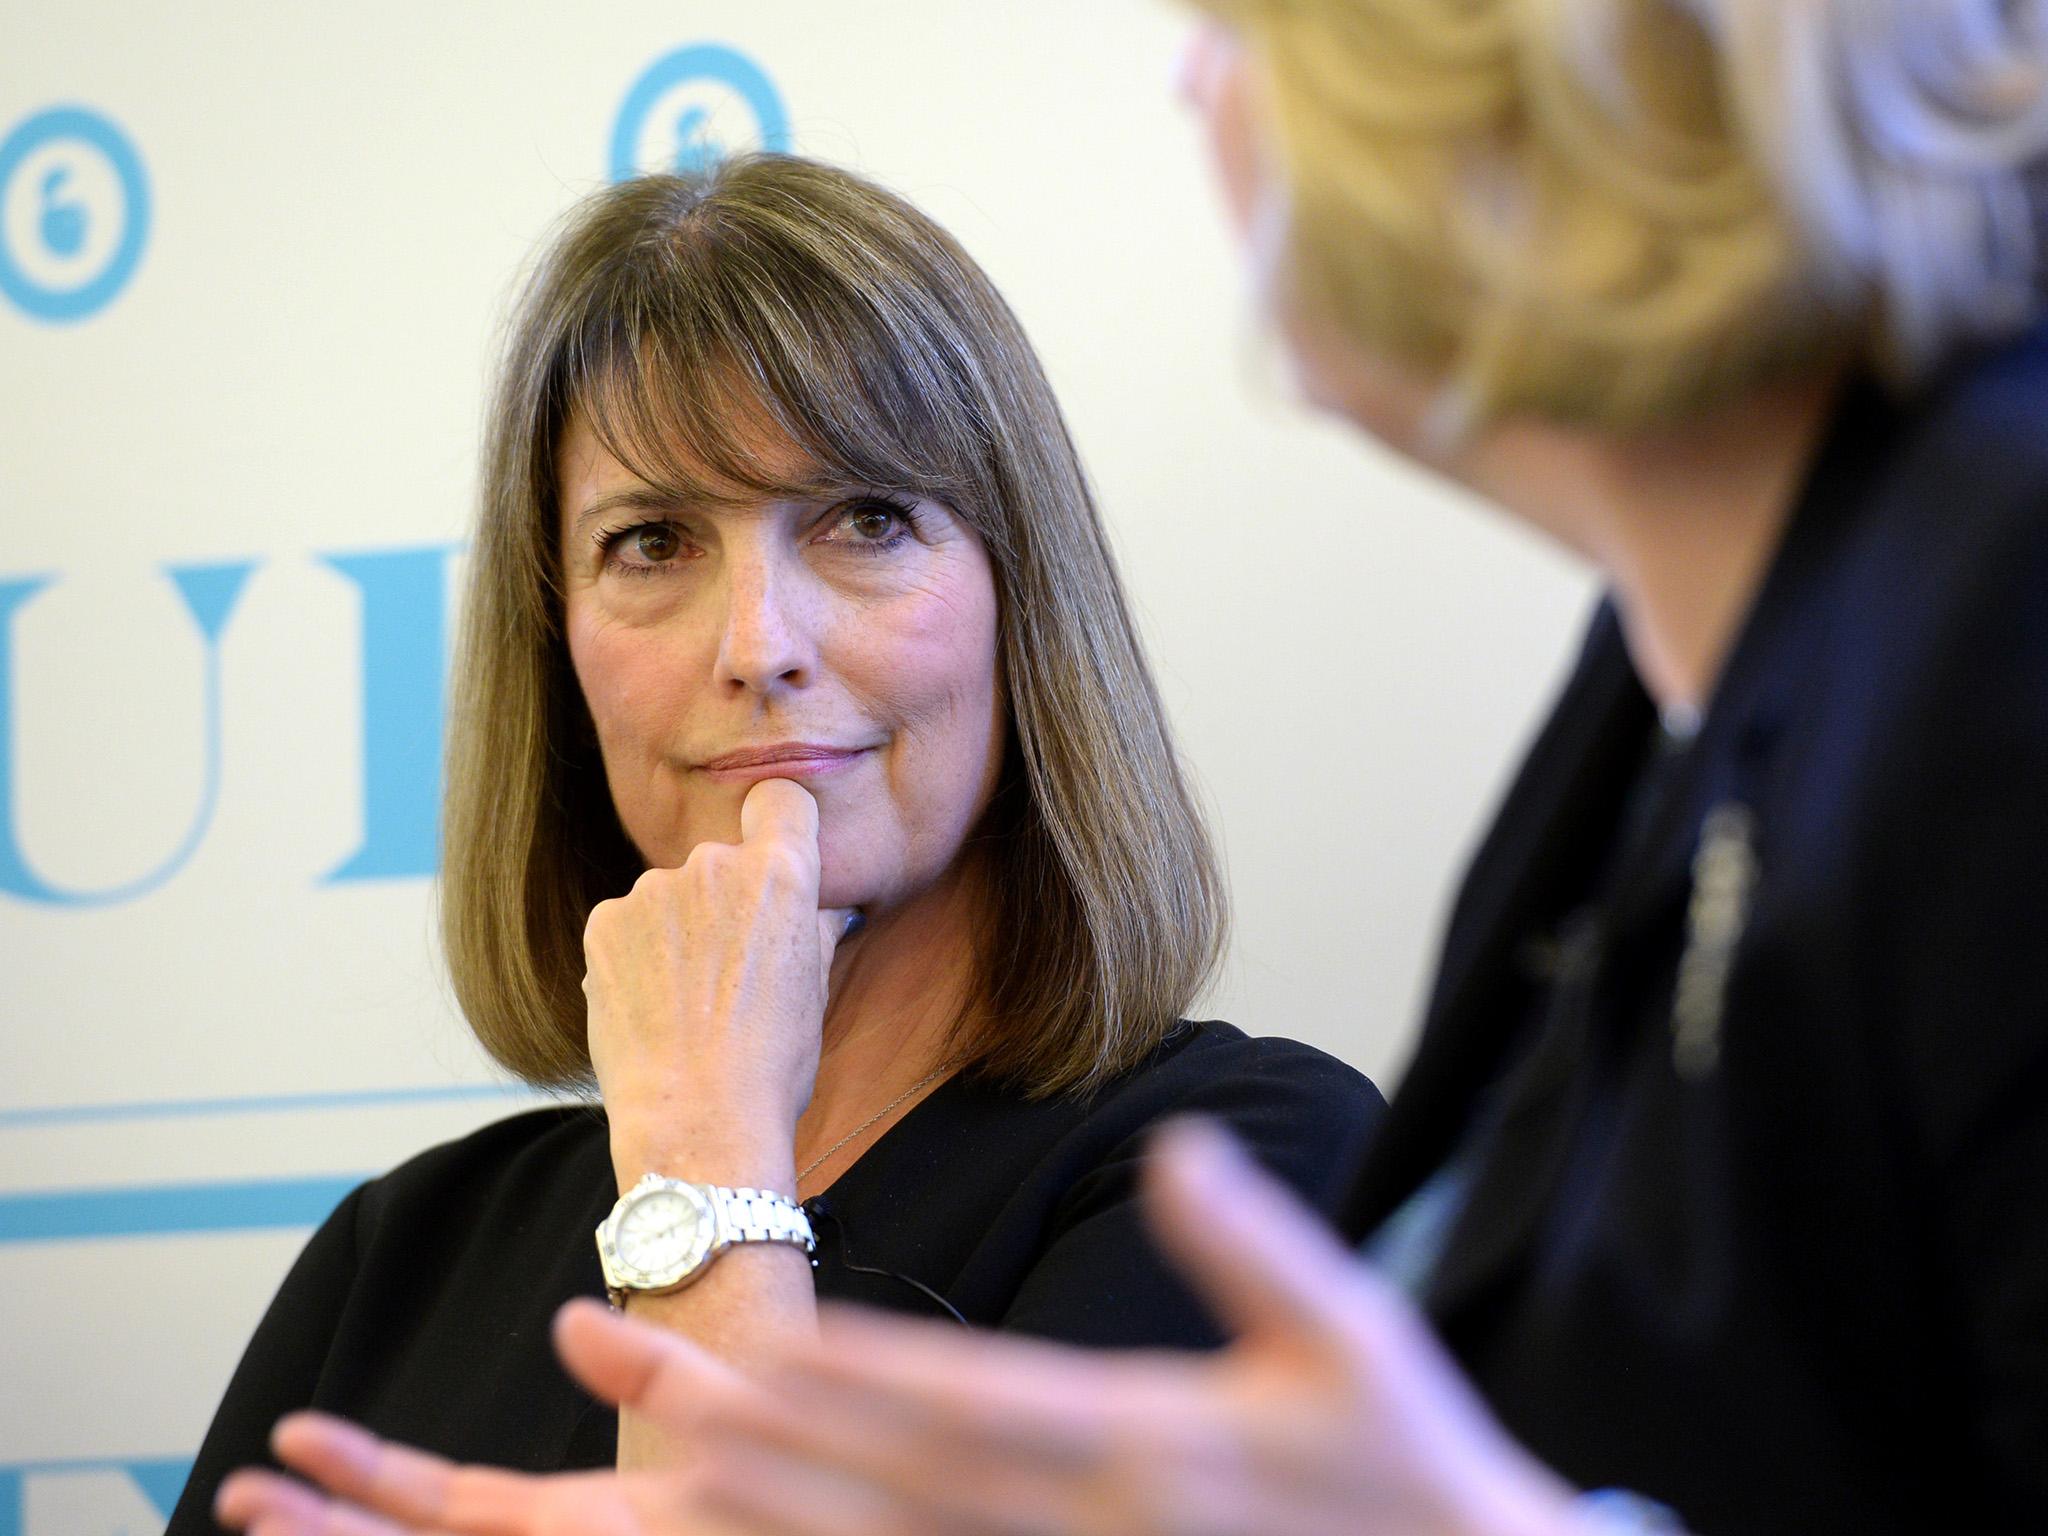 Carolyn McCall, who joined the channel as chief executive in January after seven years as easyJet, faces a challenge